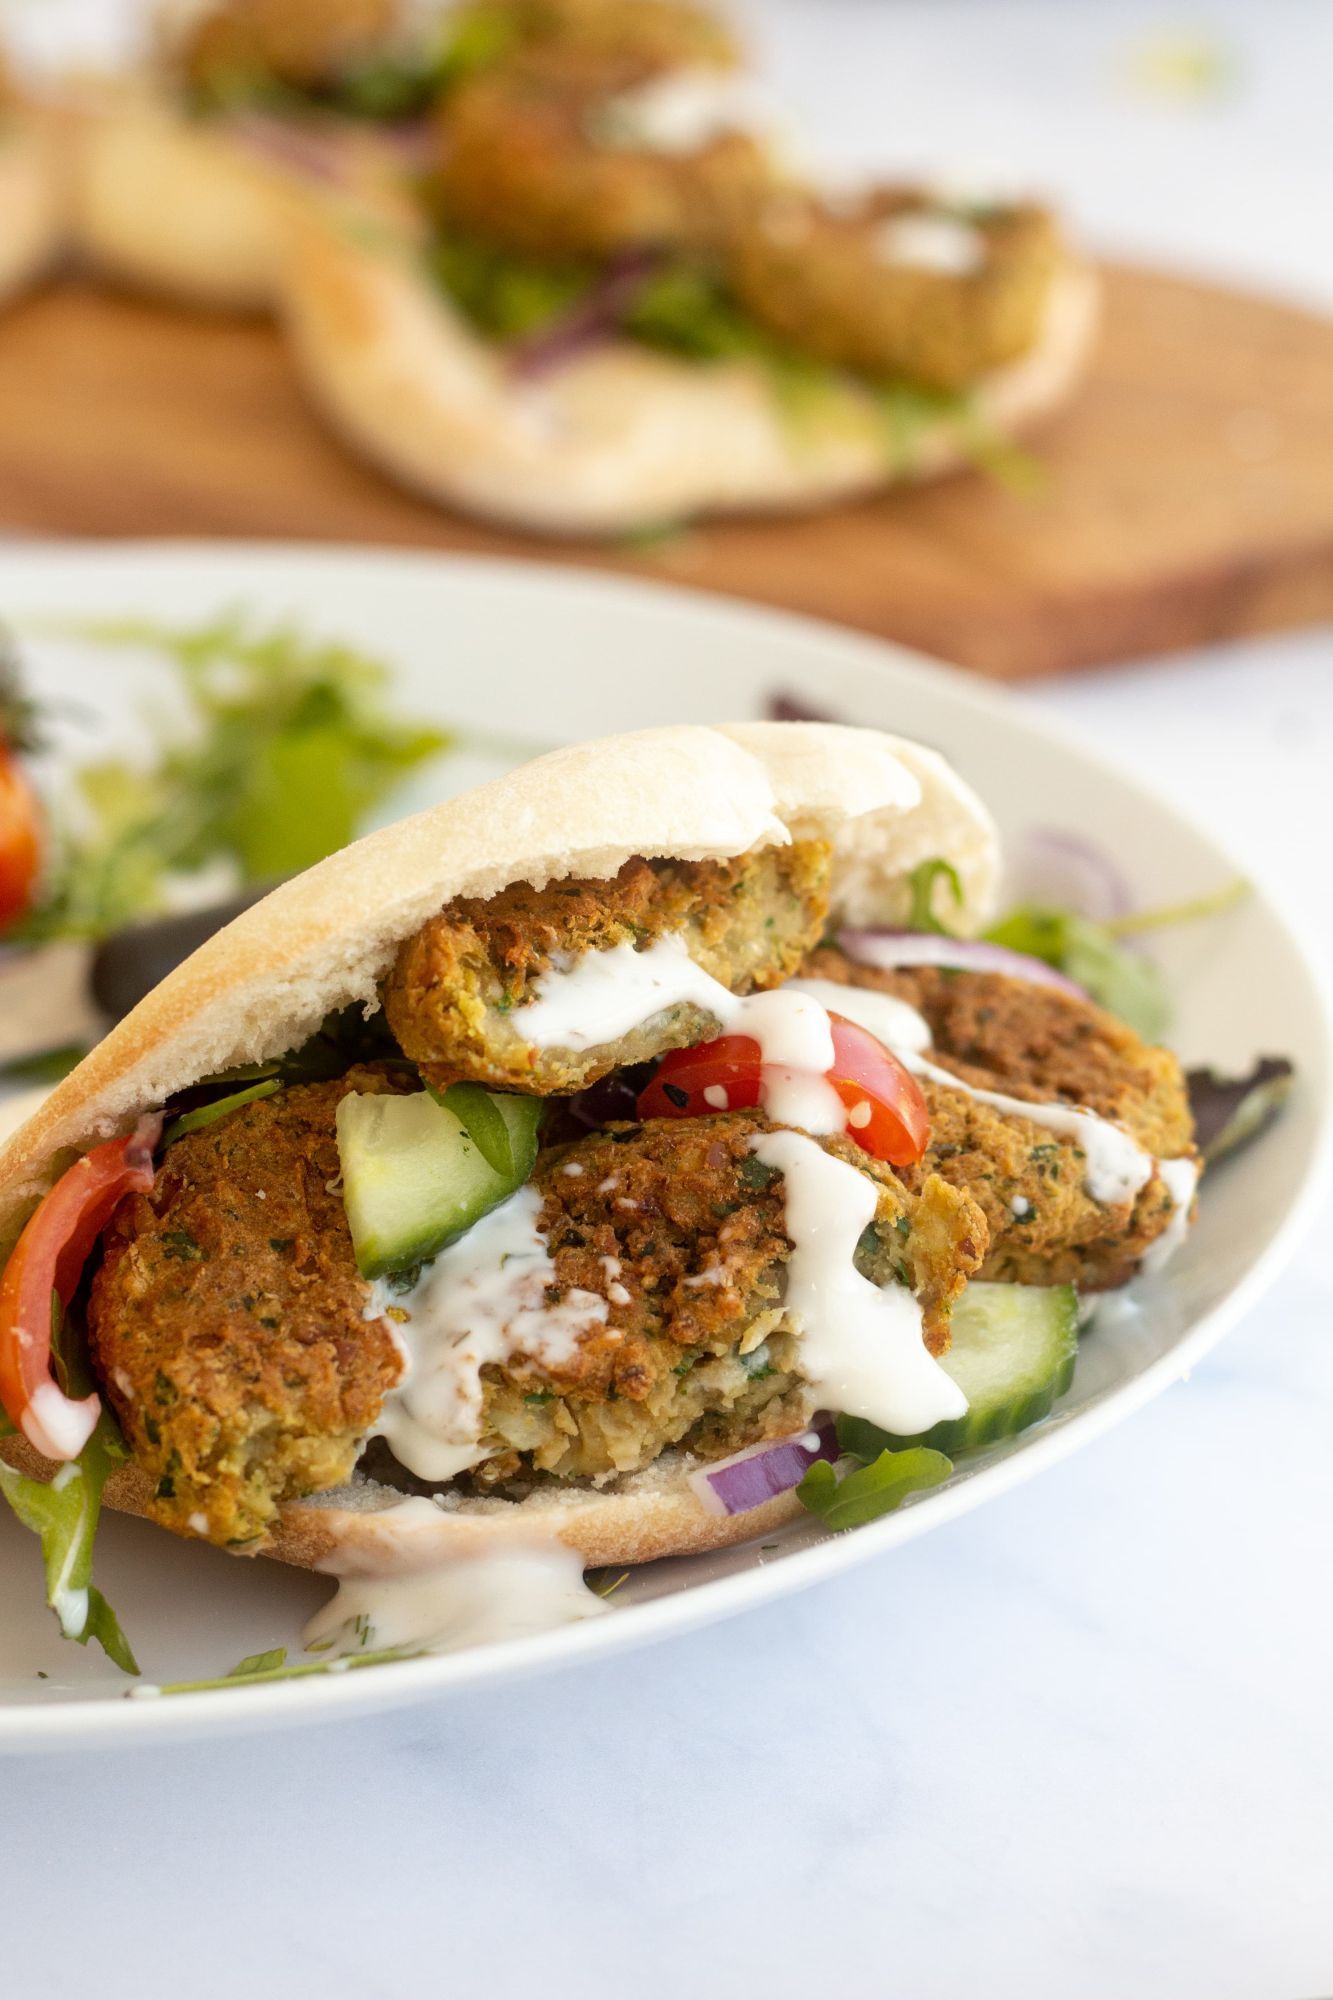 Homemade baked falafel served in a pita with cucumbers, tomatoes, and tahini.